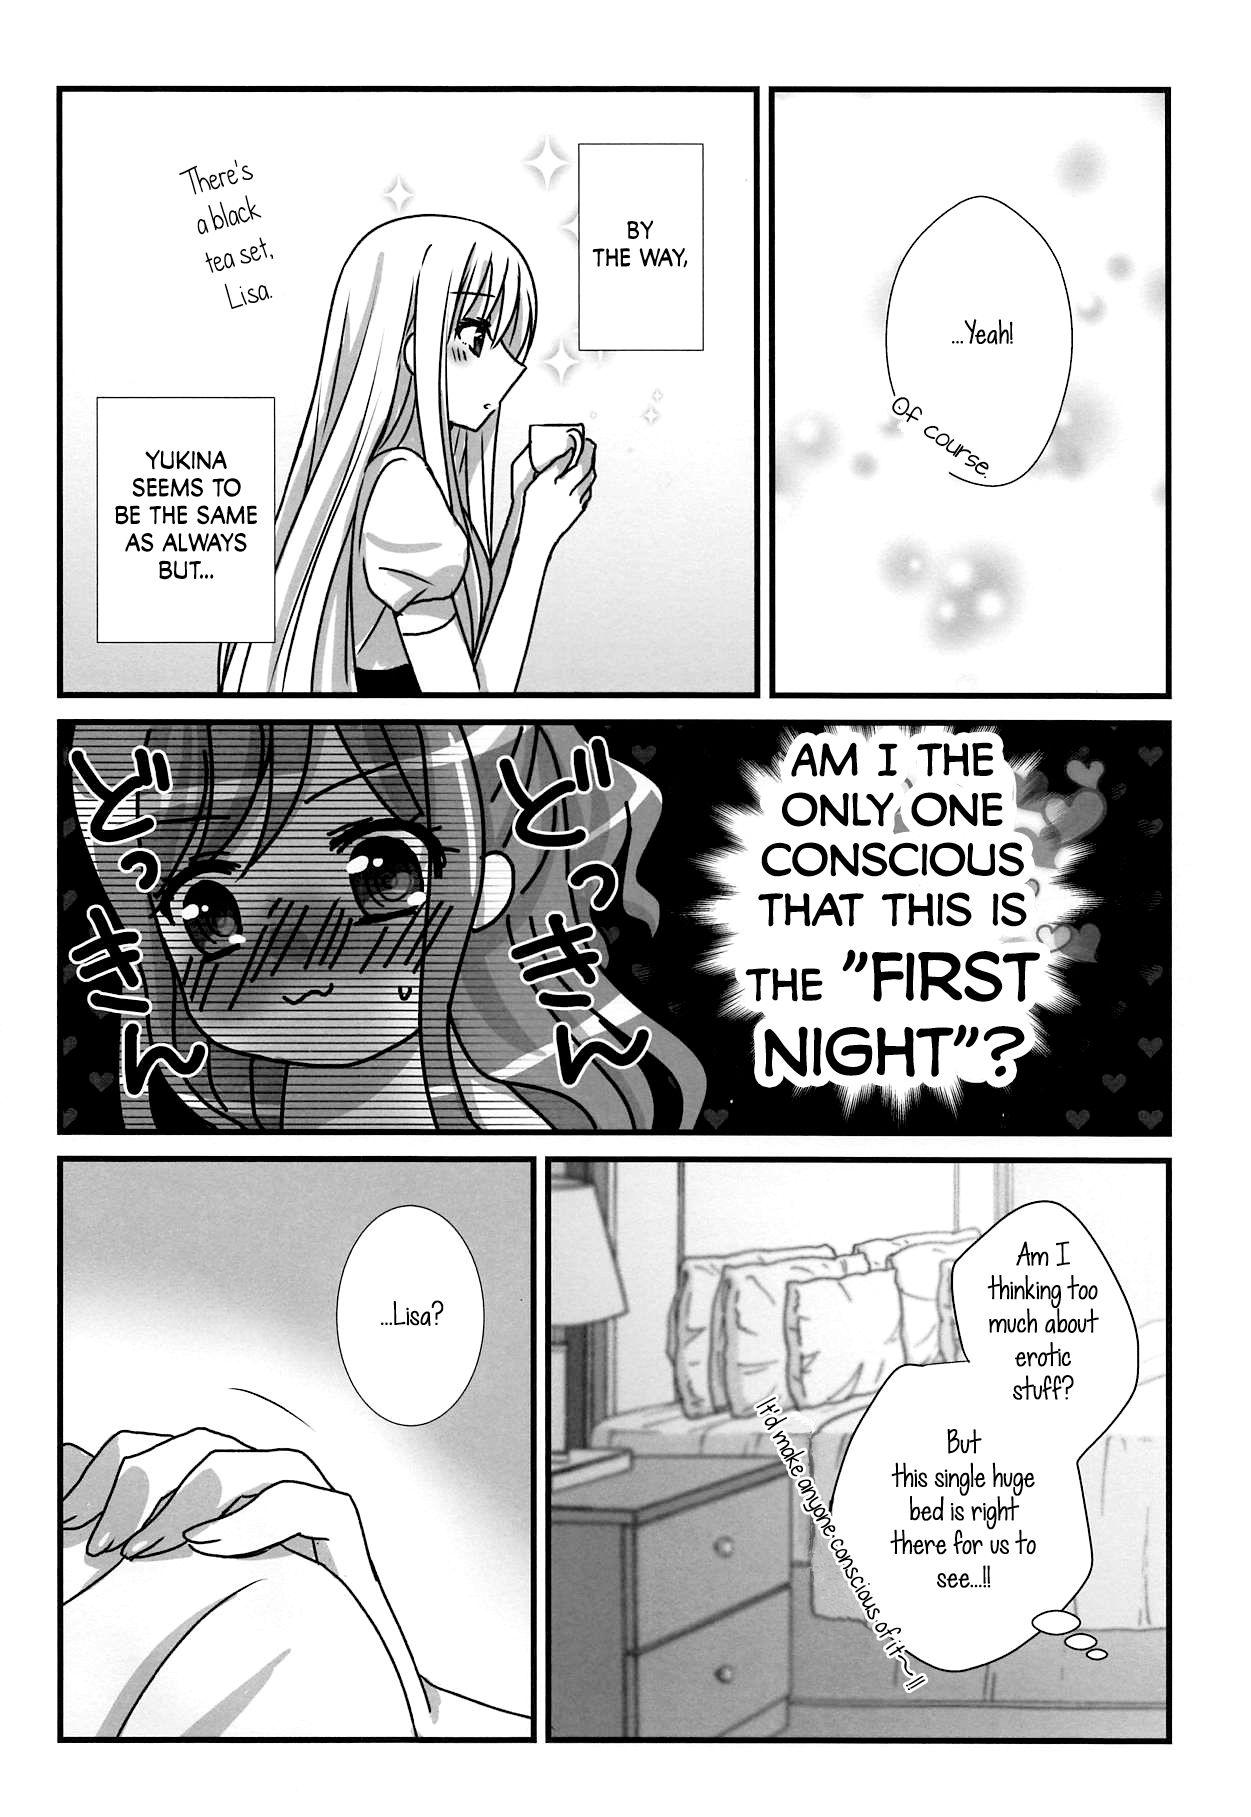 Couple Wedding Night - Bang dream Amature Sex Tapes - Page 7